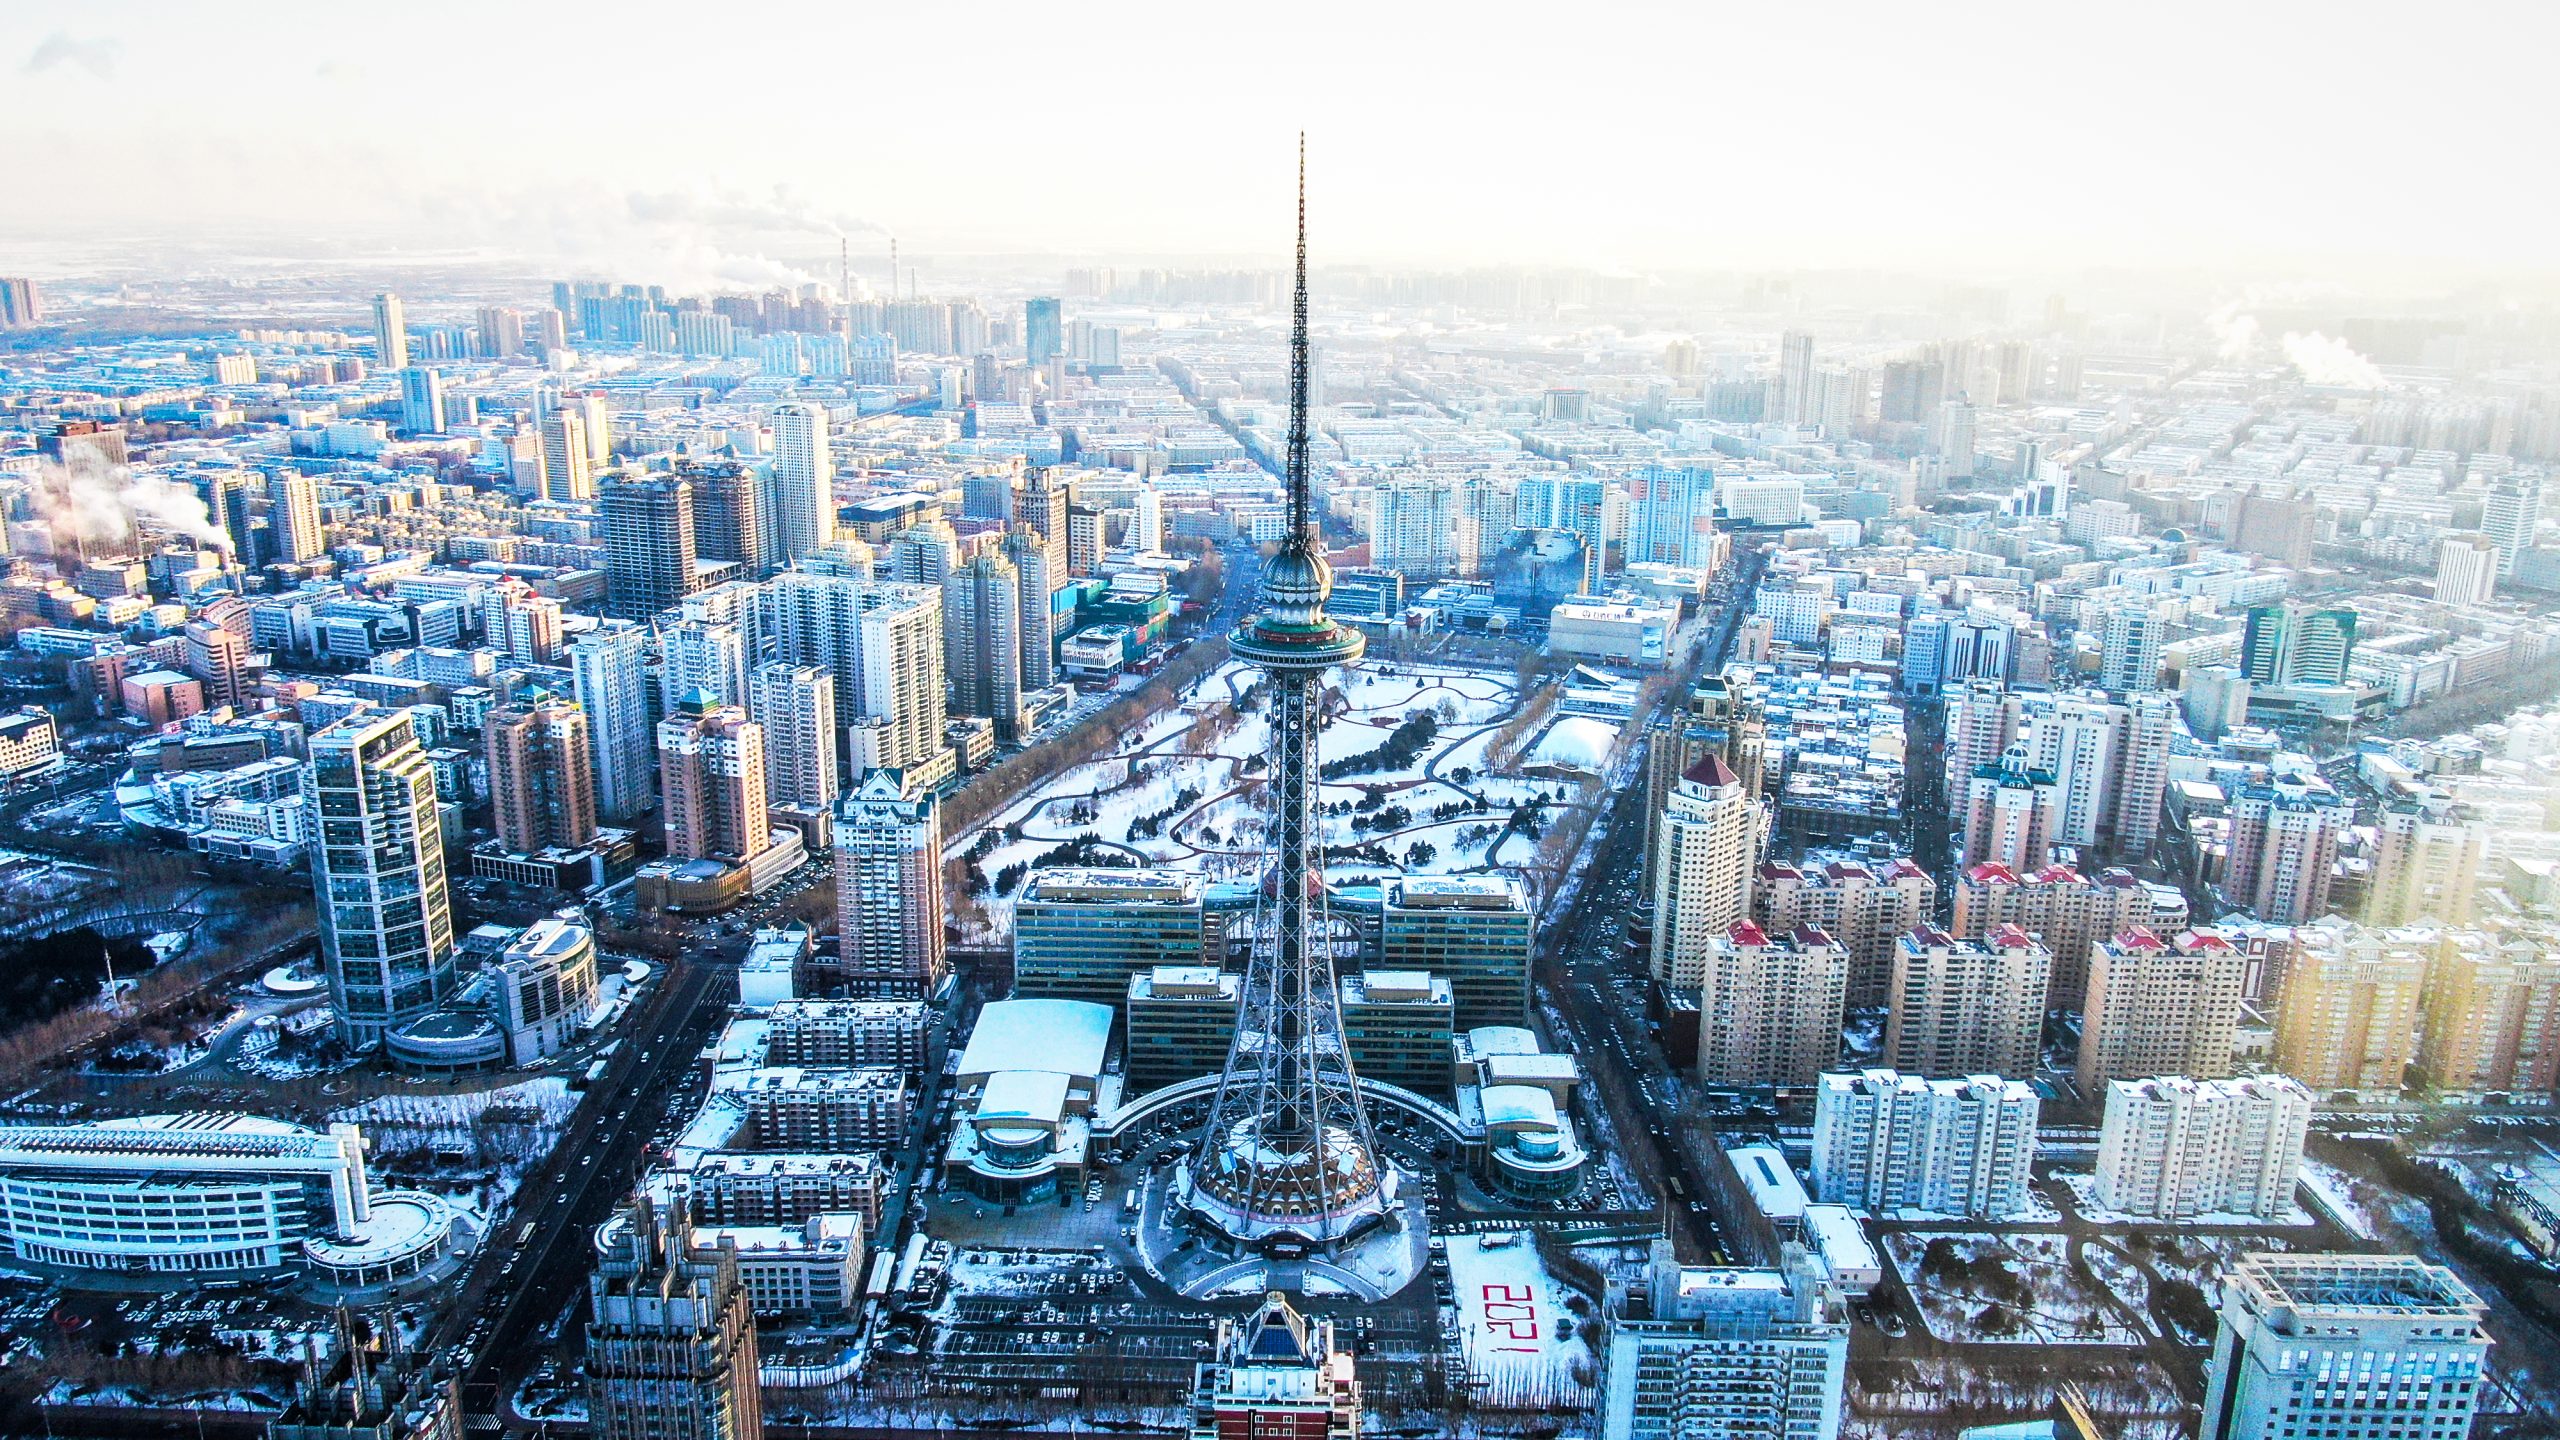 Embracing the Loong Tower: The Marvel of Harbin Joins the World Federation of Great Towers